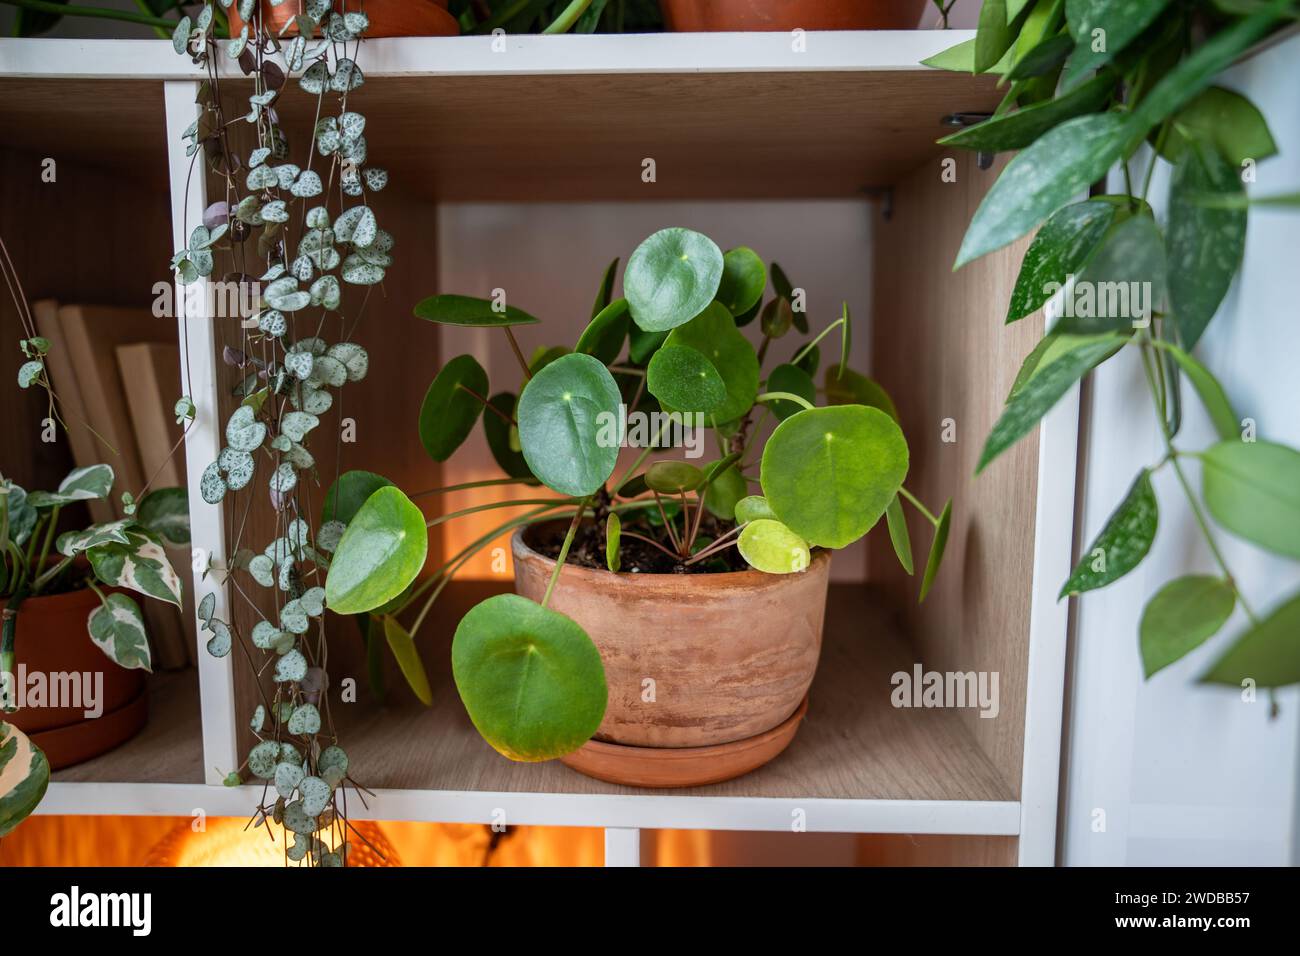 Pilea peperomioides in terracotta pot, known as Chinese money plant on shelf at home.  Stock Photo